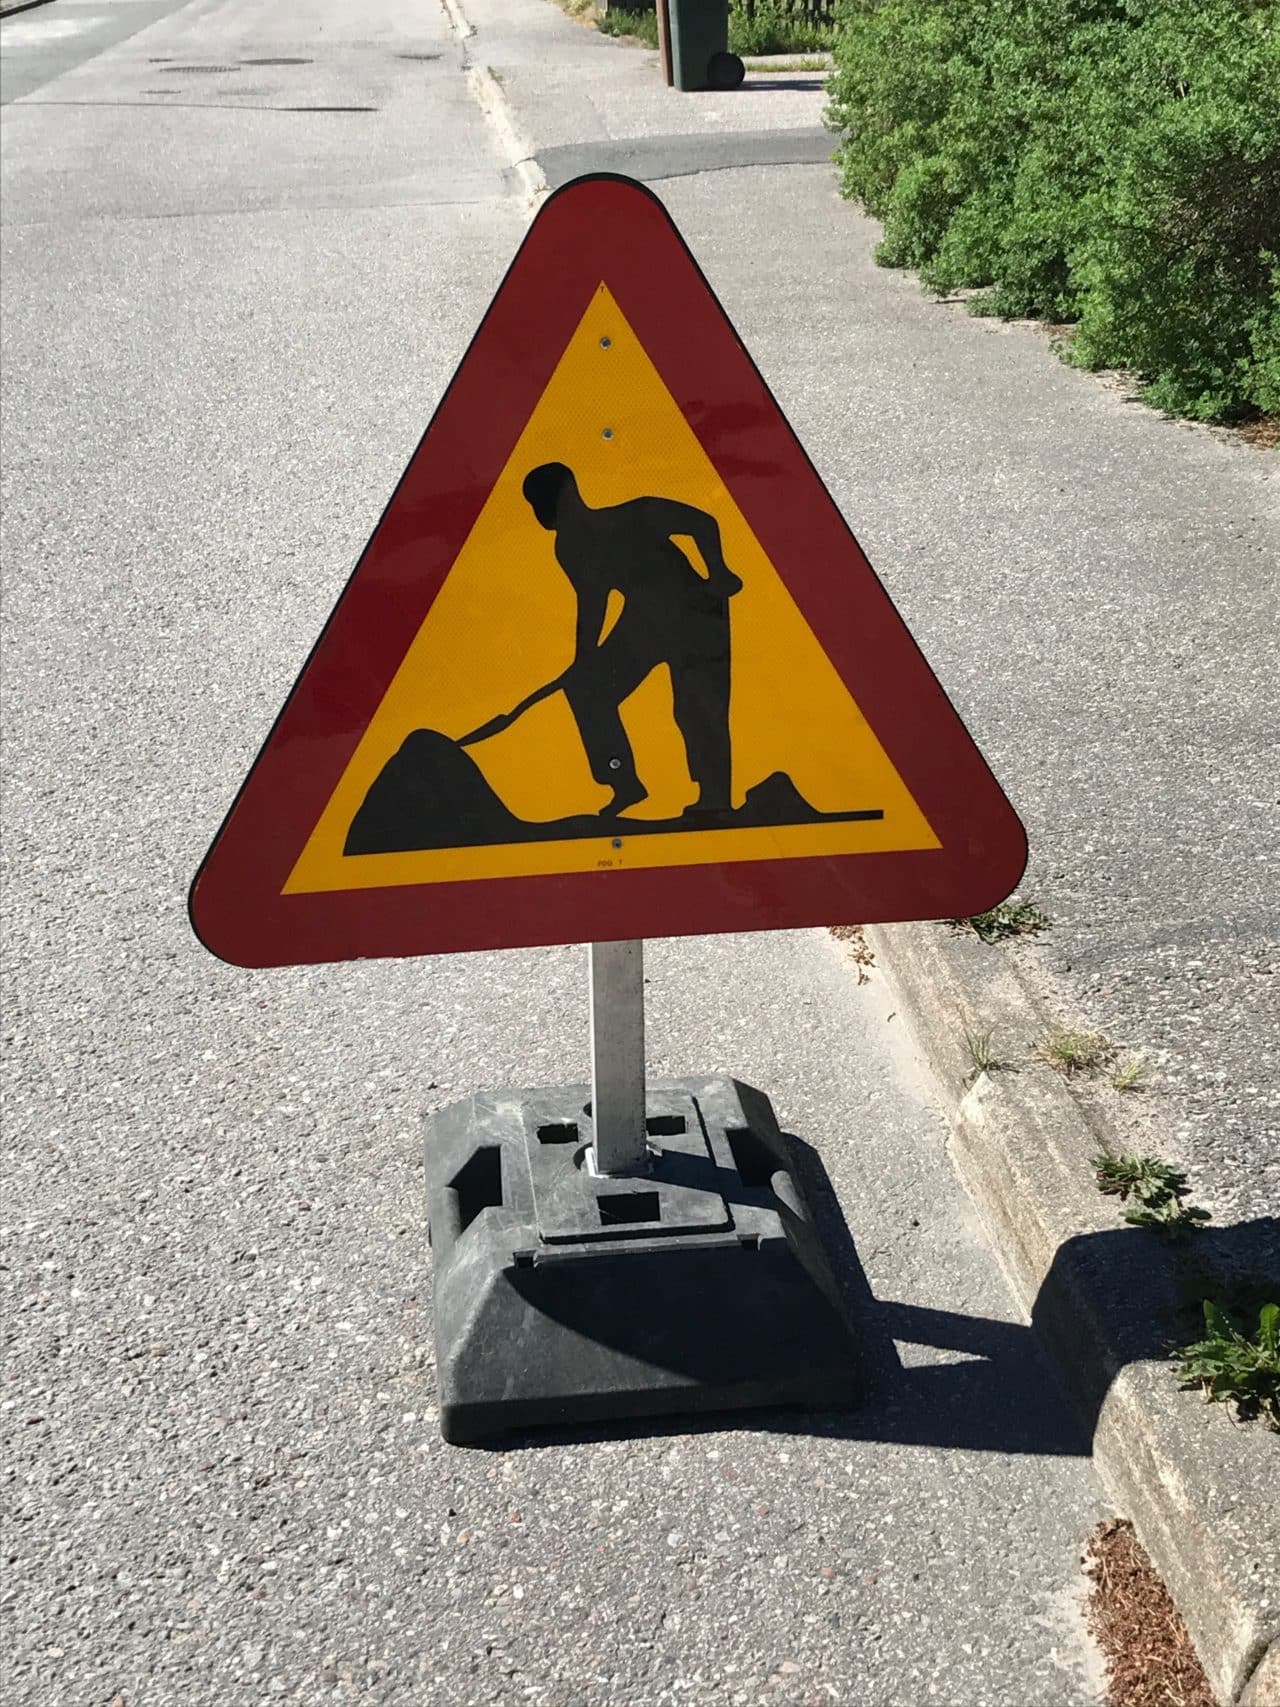 Construction Work Triangle Roadside Sign